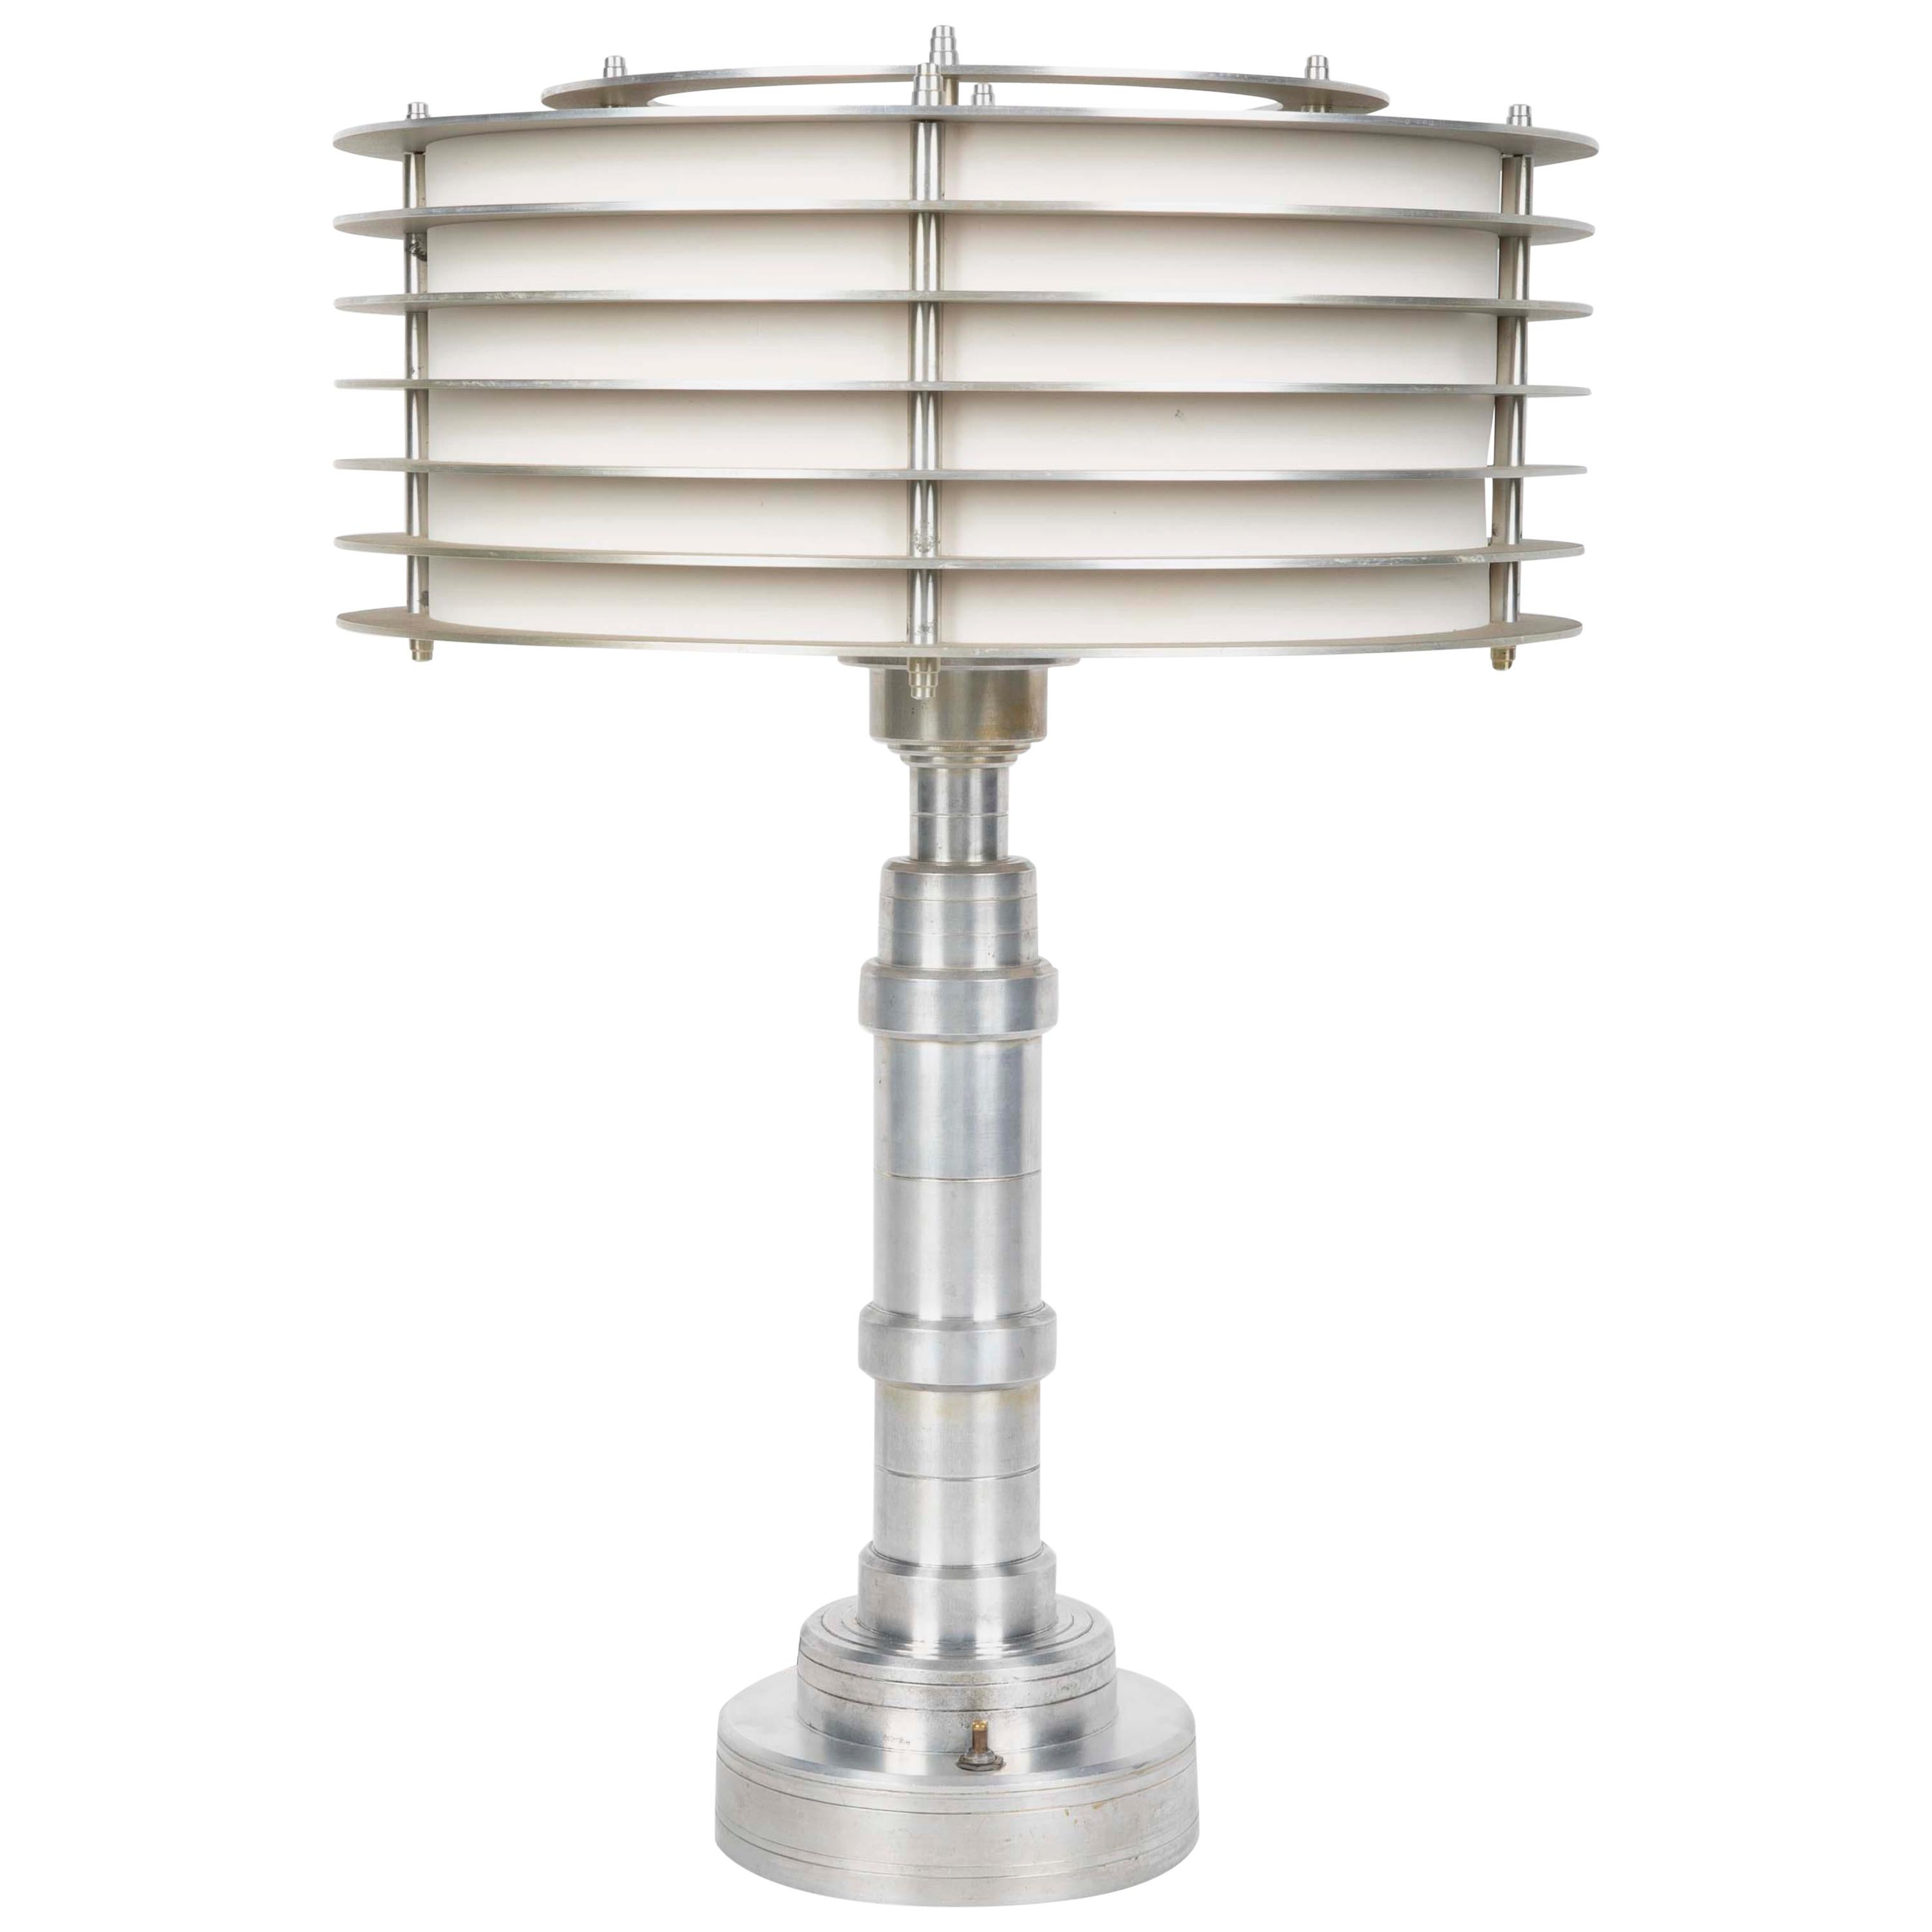 Pattyn Products Art Deco Table Lamp Attributed to Walter Von Nessen